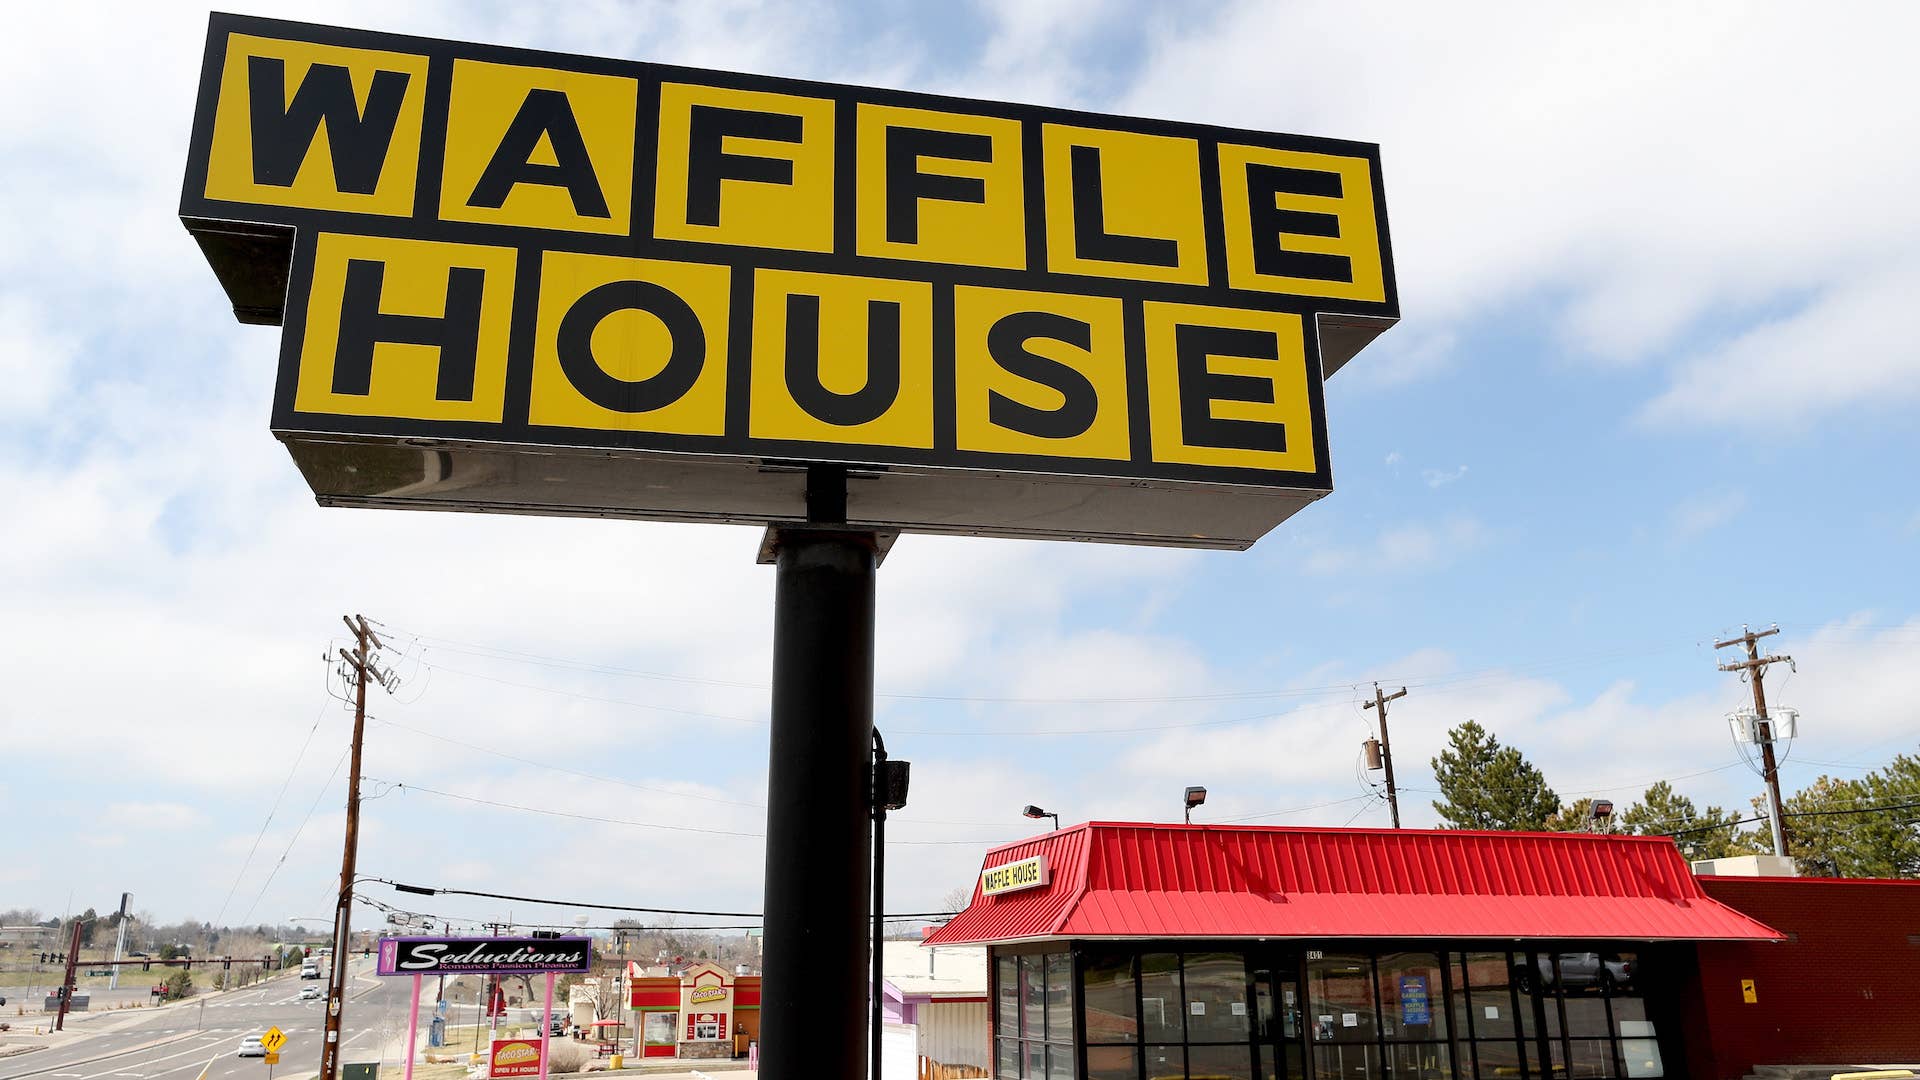 Photograph of Waffle House sign